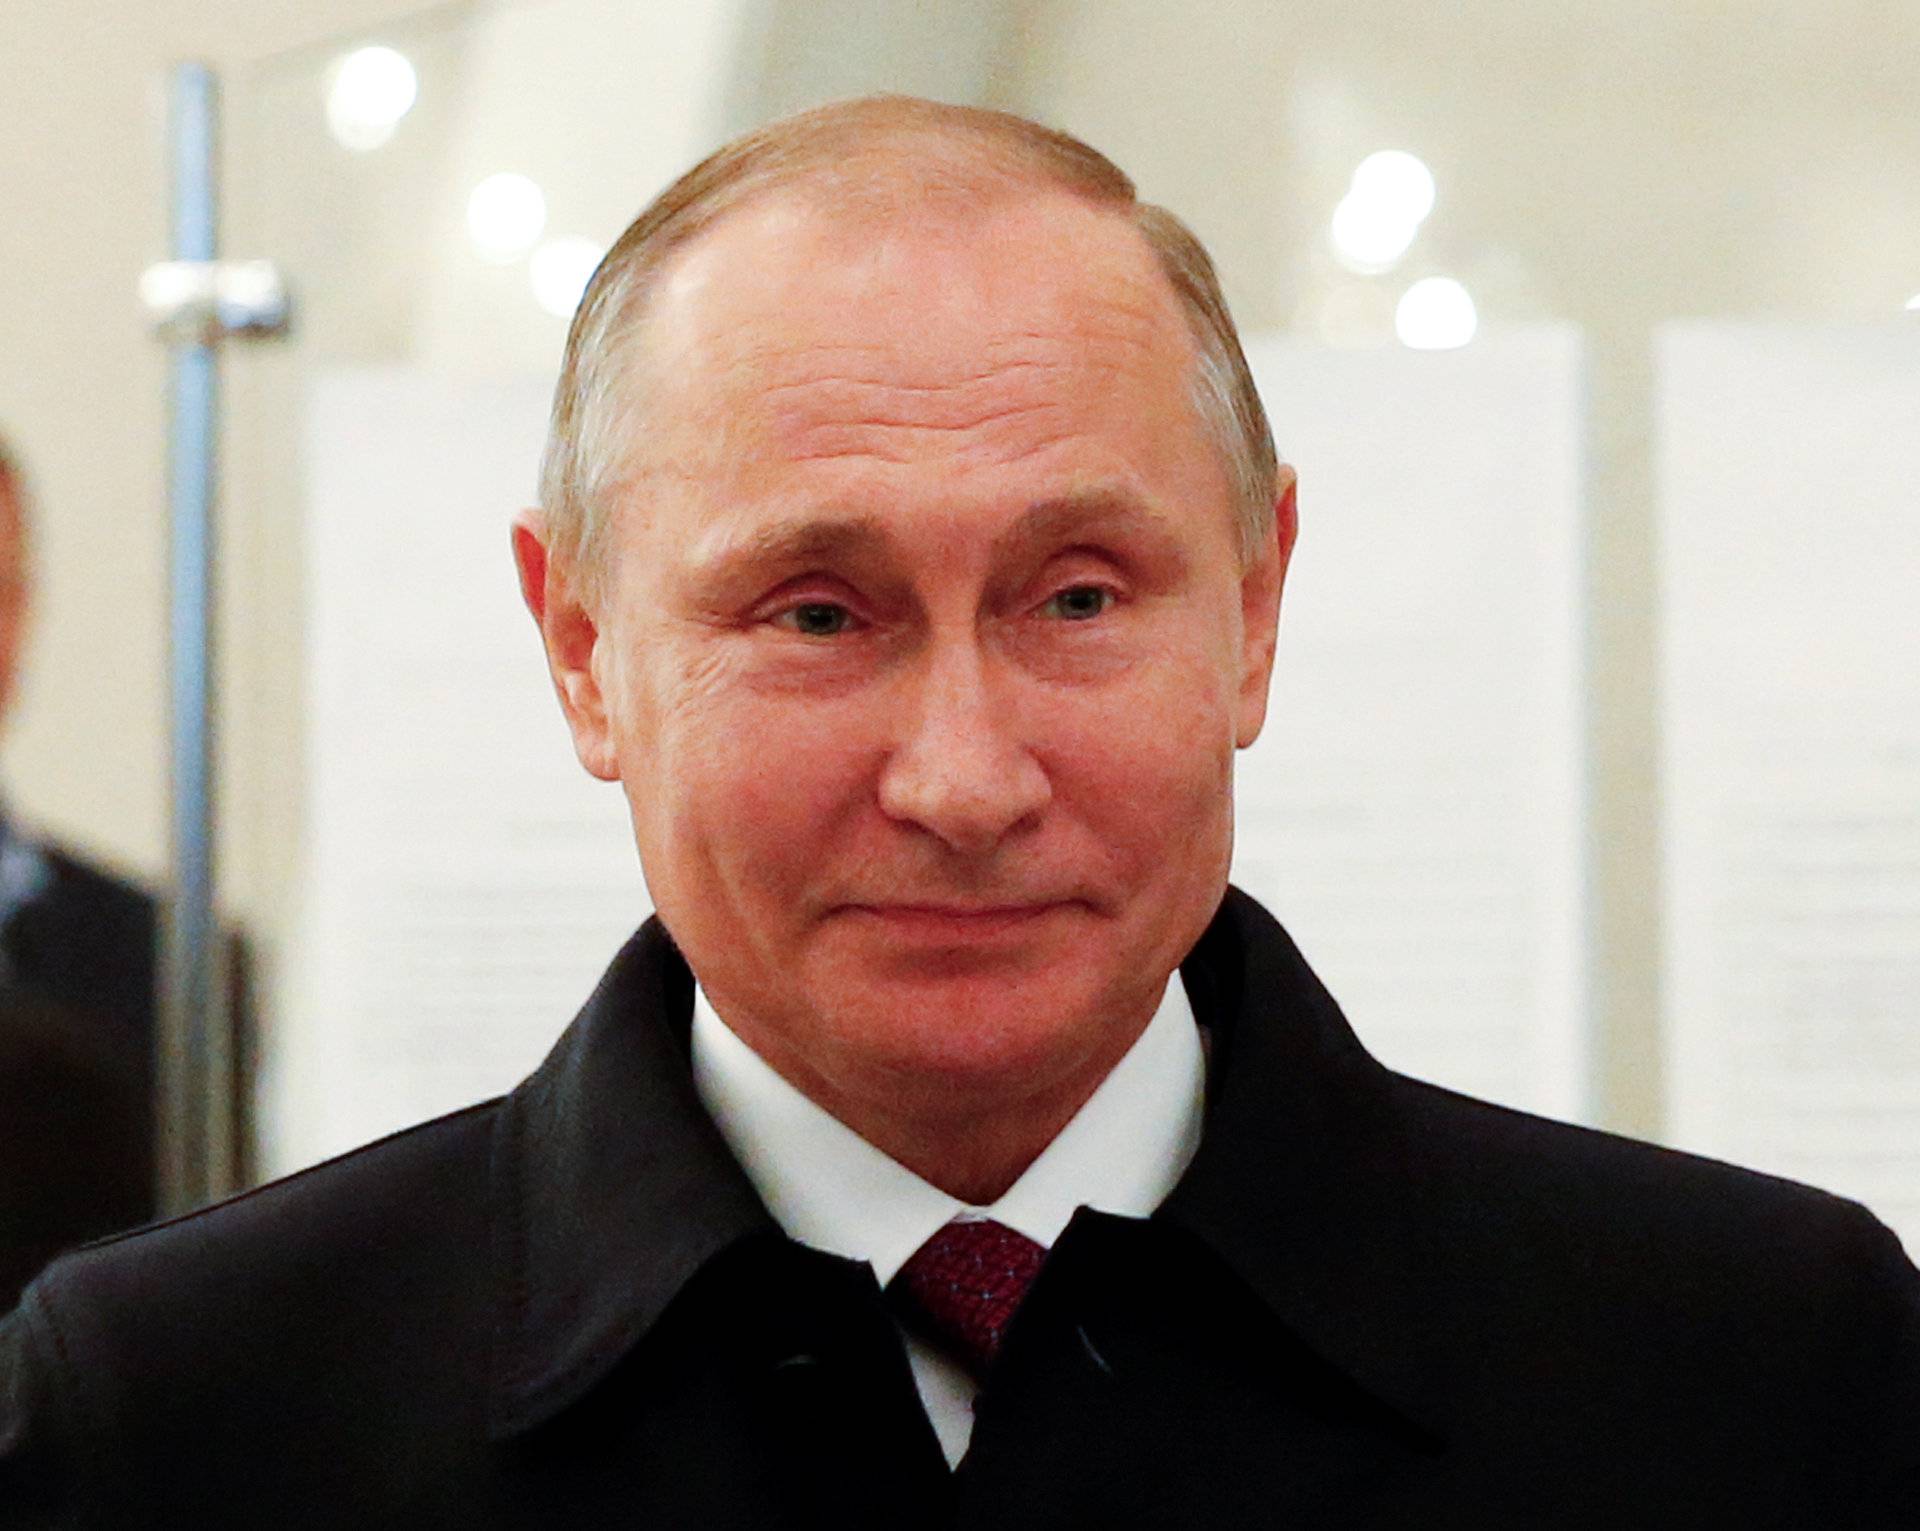 Russian President Putin visits polling station during parliamentary election in Moscow